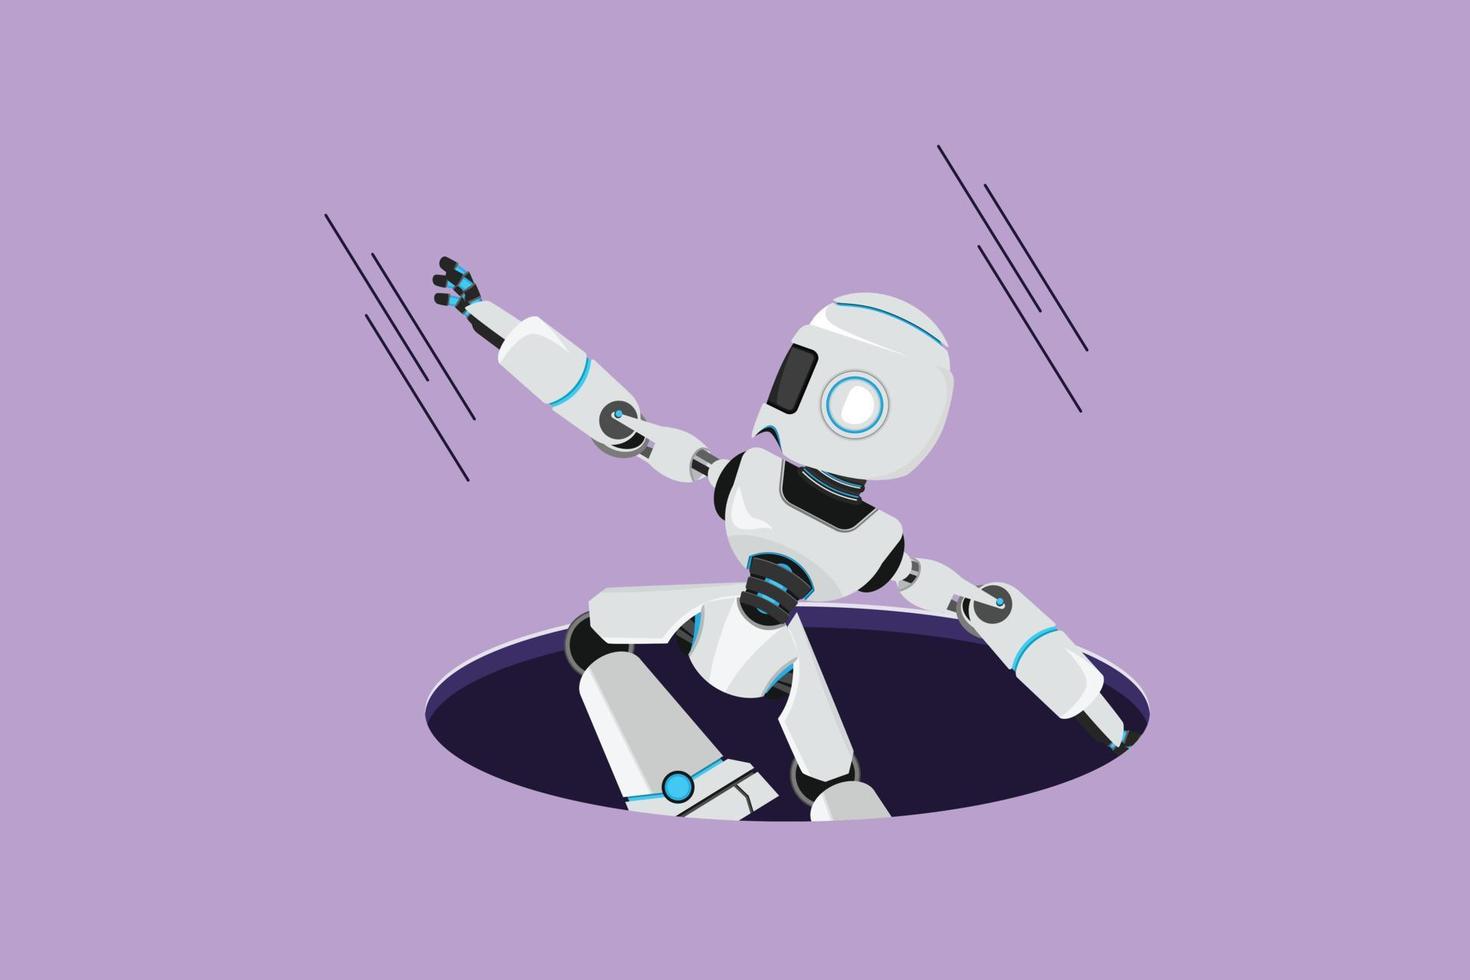 Graphic flat design drawing robot fell into manhole underground sewer. Tech business failure. Future technology development. Artificial intelligence machine learning. Cartoon style vector illustration